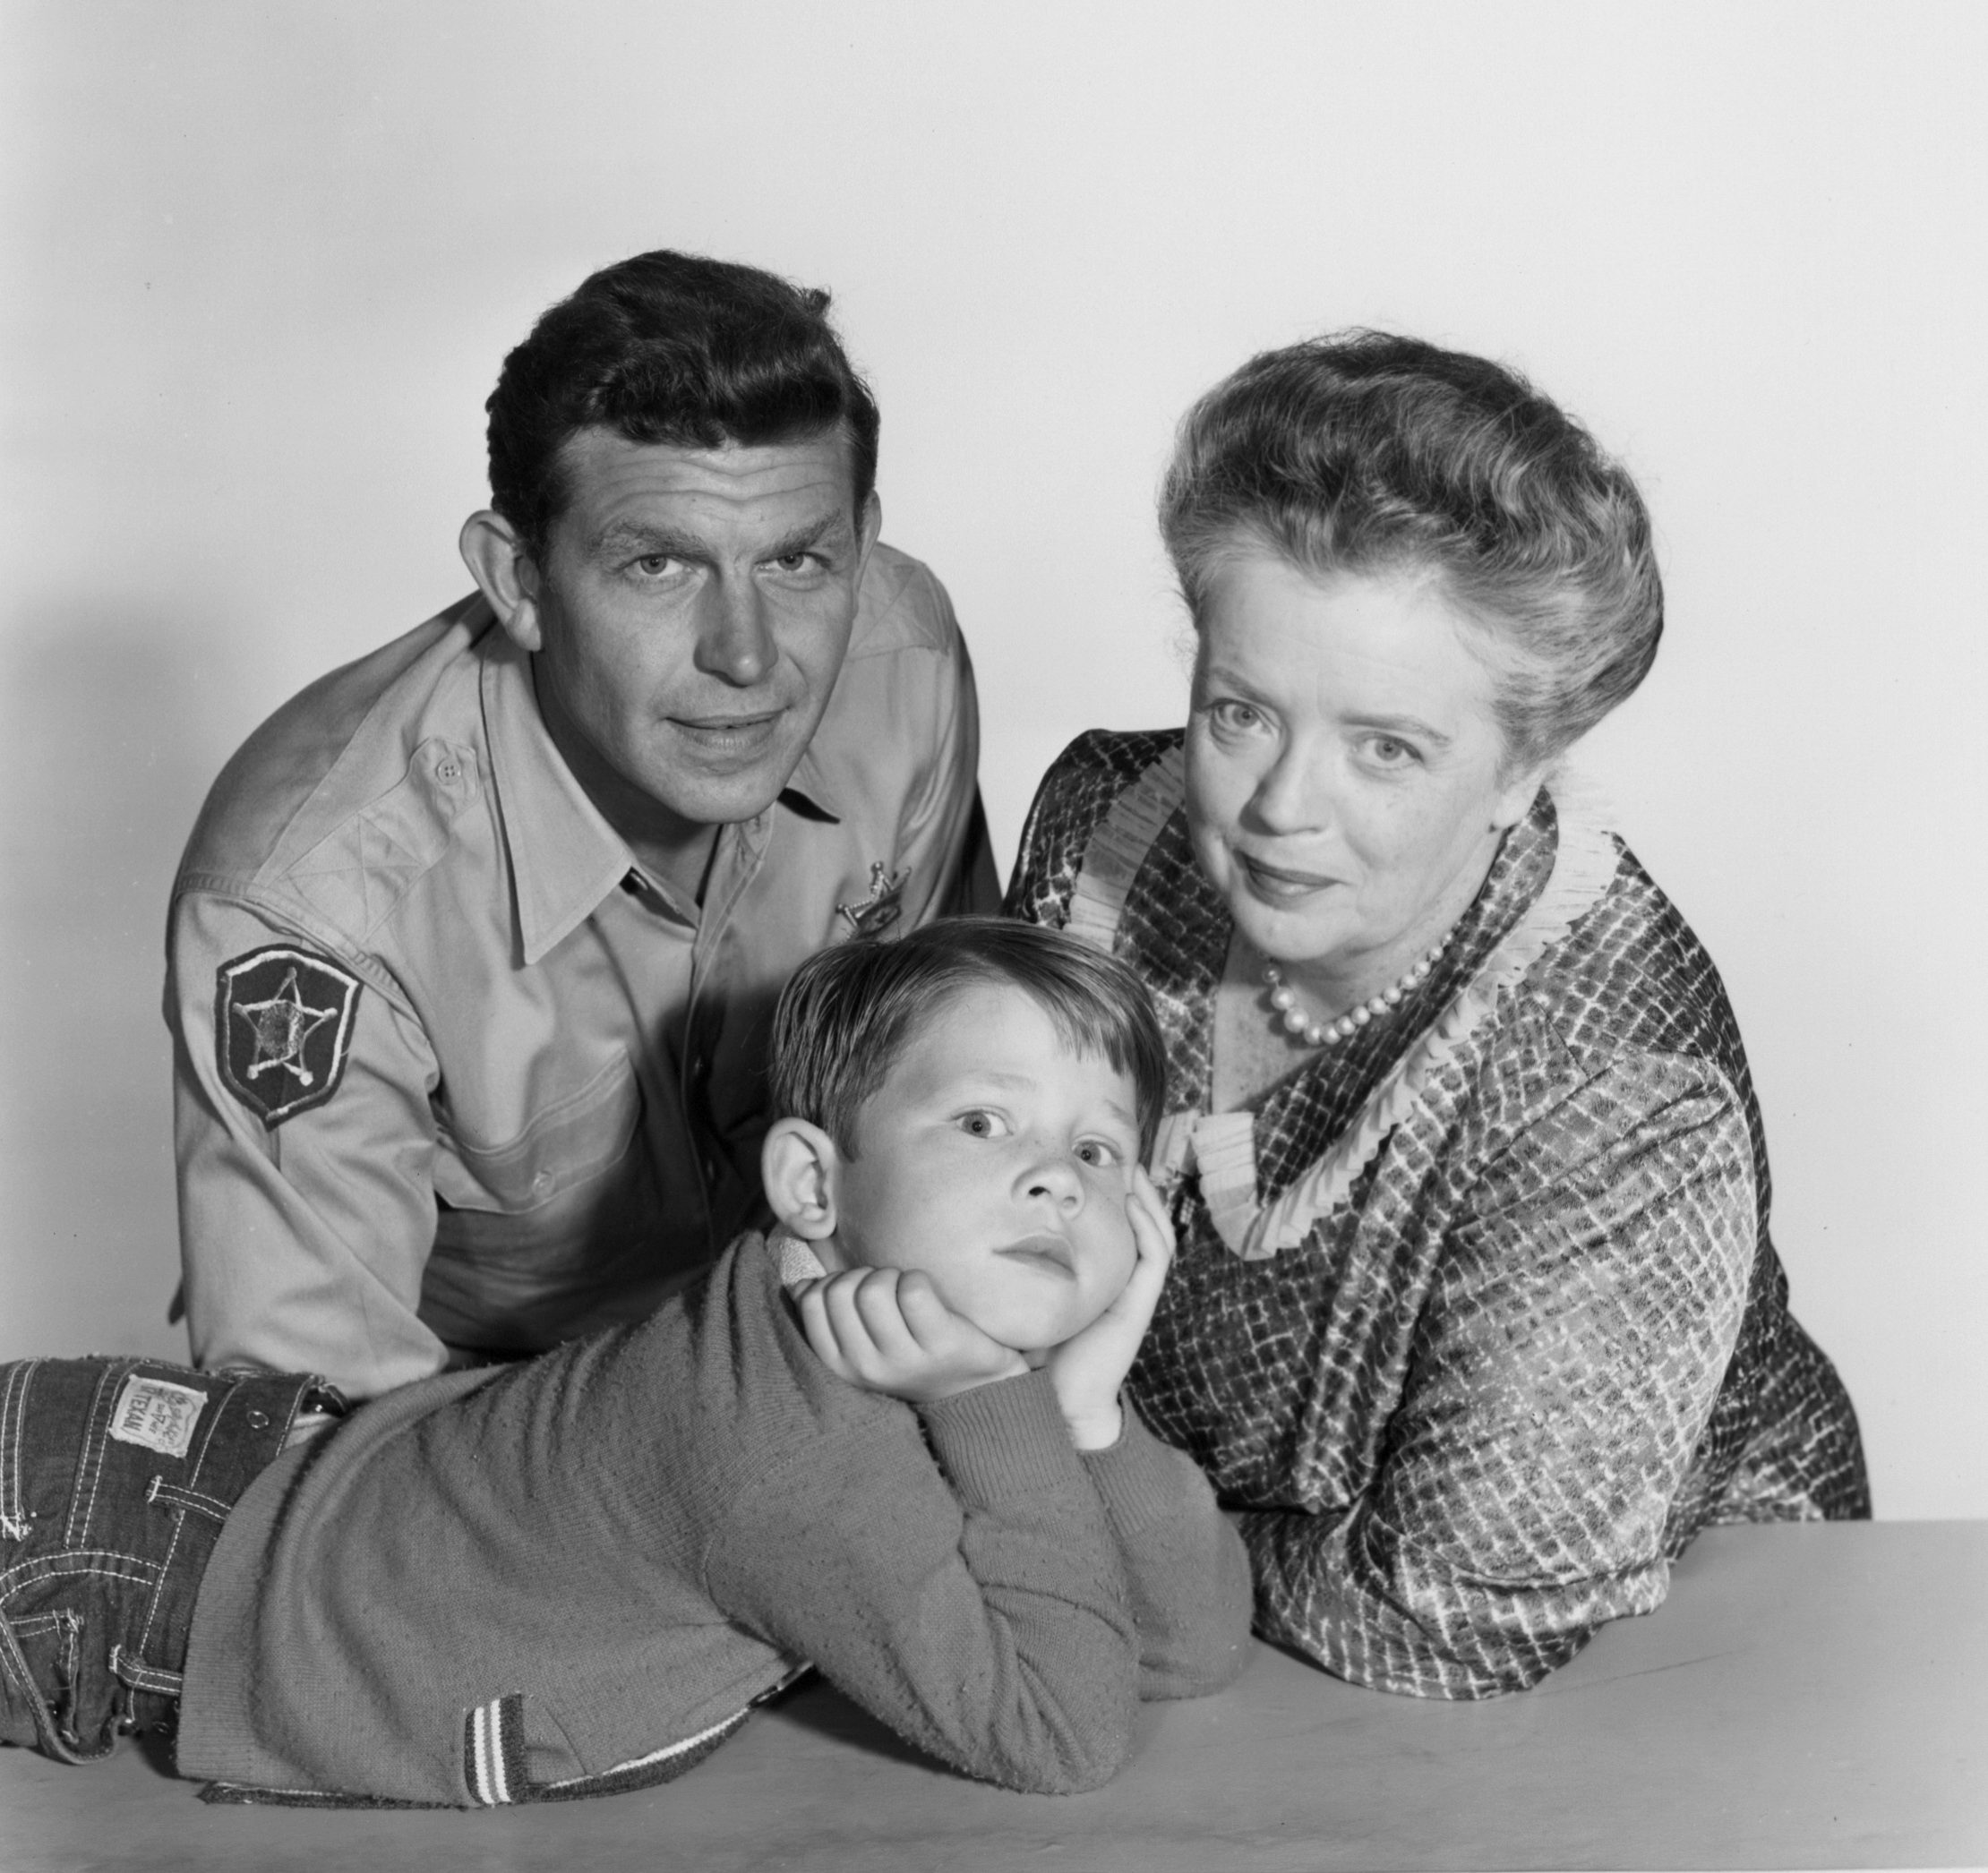 Frances Bavier, right, in a promotional photo as 'The Andy Griffith Show' character Aunt Bee along with co-stars Andy Griffith and Ron Howard.